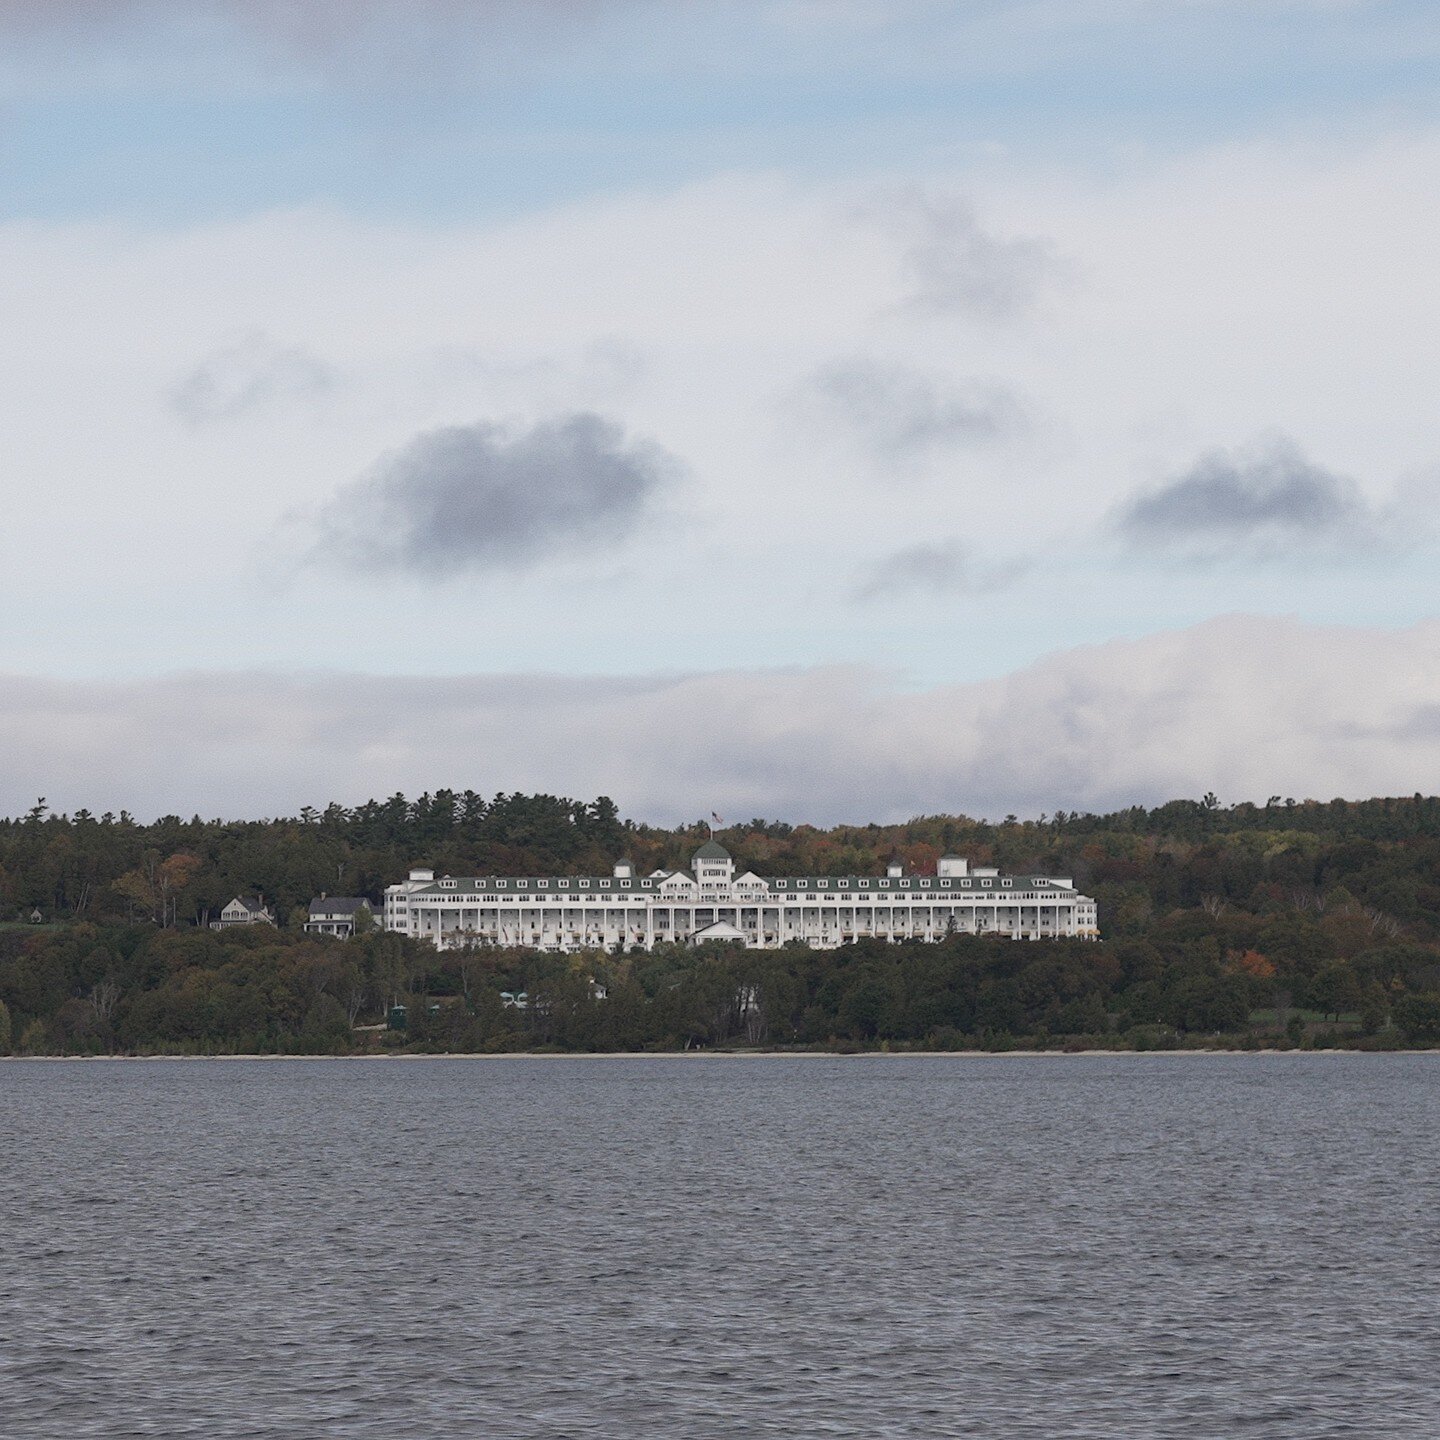 With winter fully upon us - now's the time to start planning your next adventures. 

#grandhotel #mackinacisland #thegreatlakes